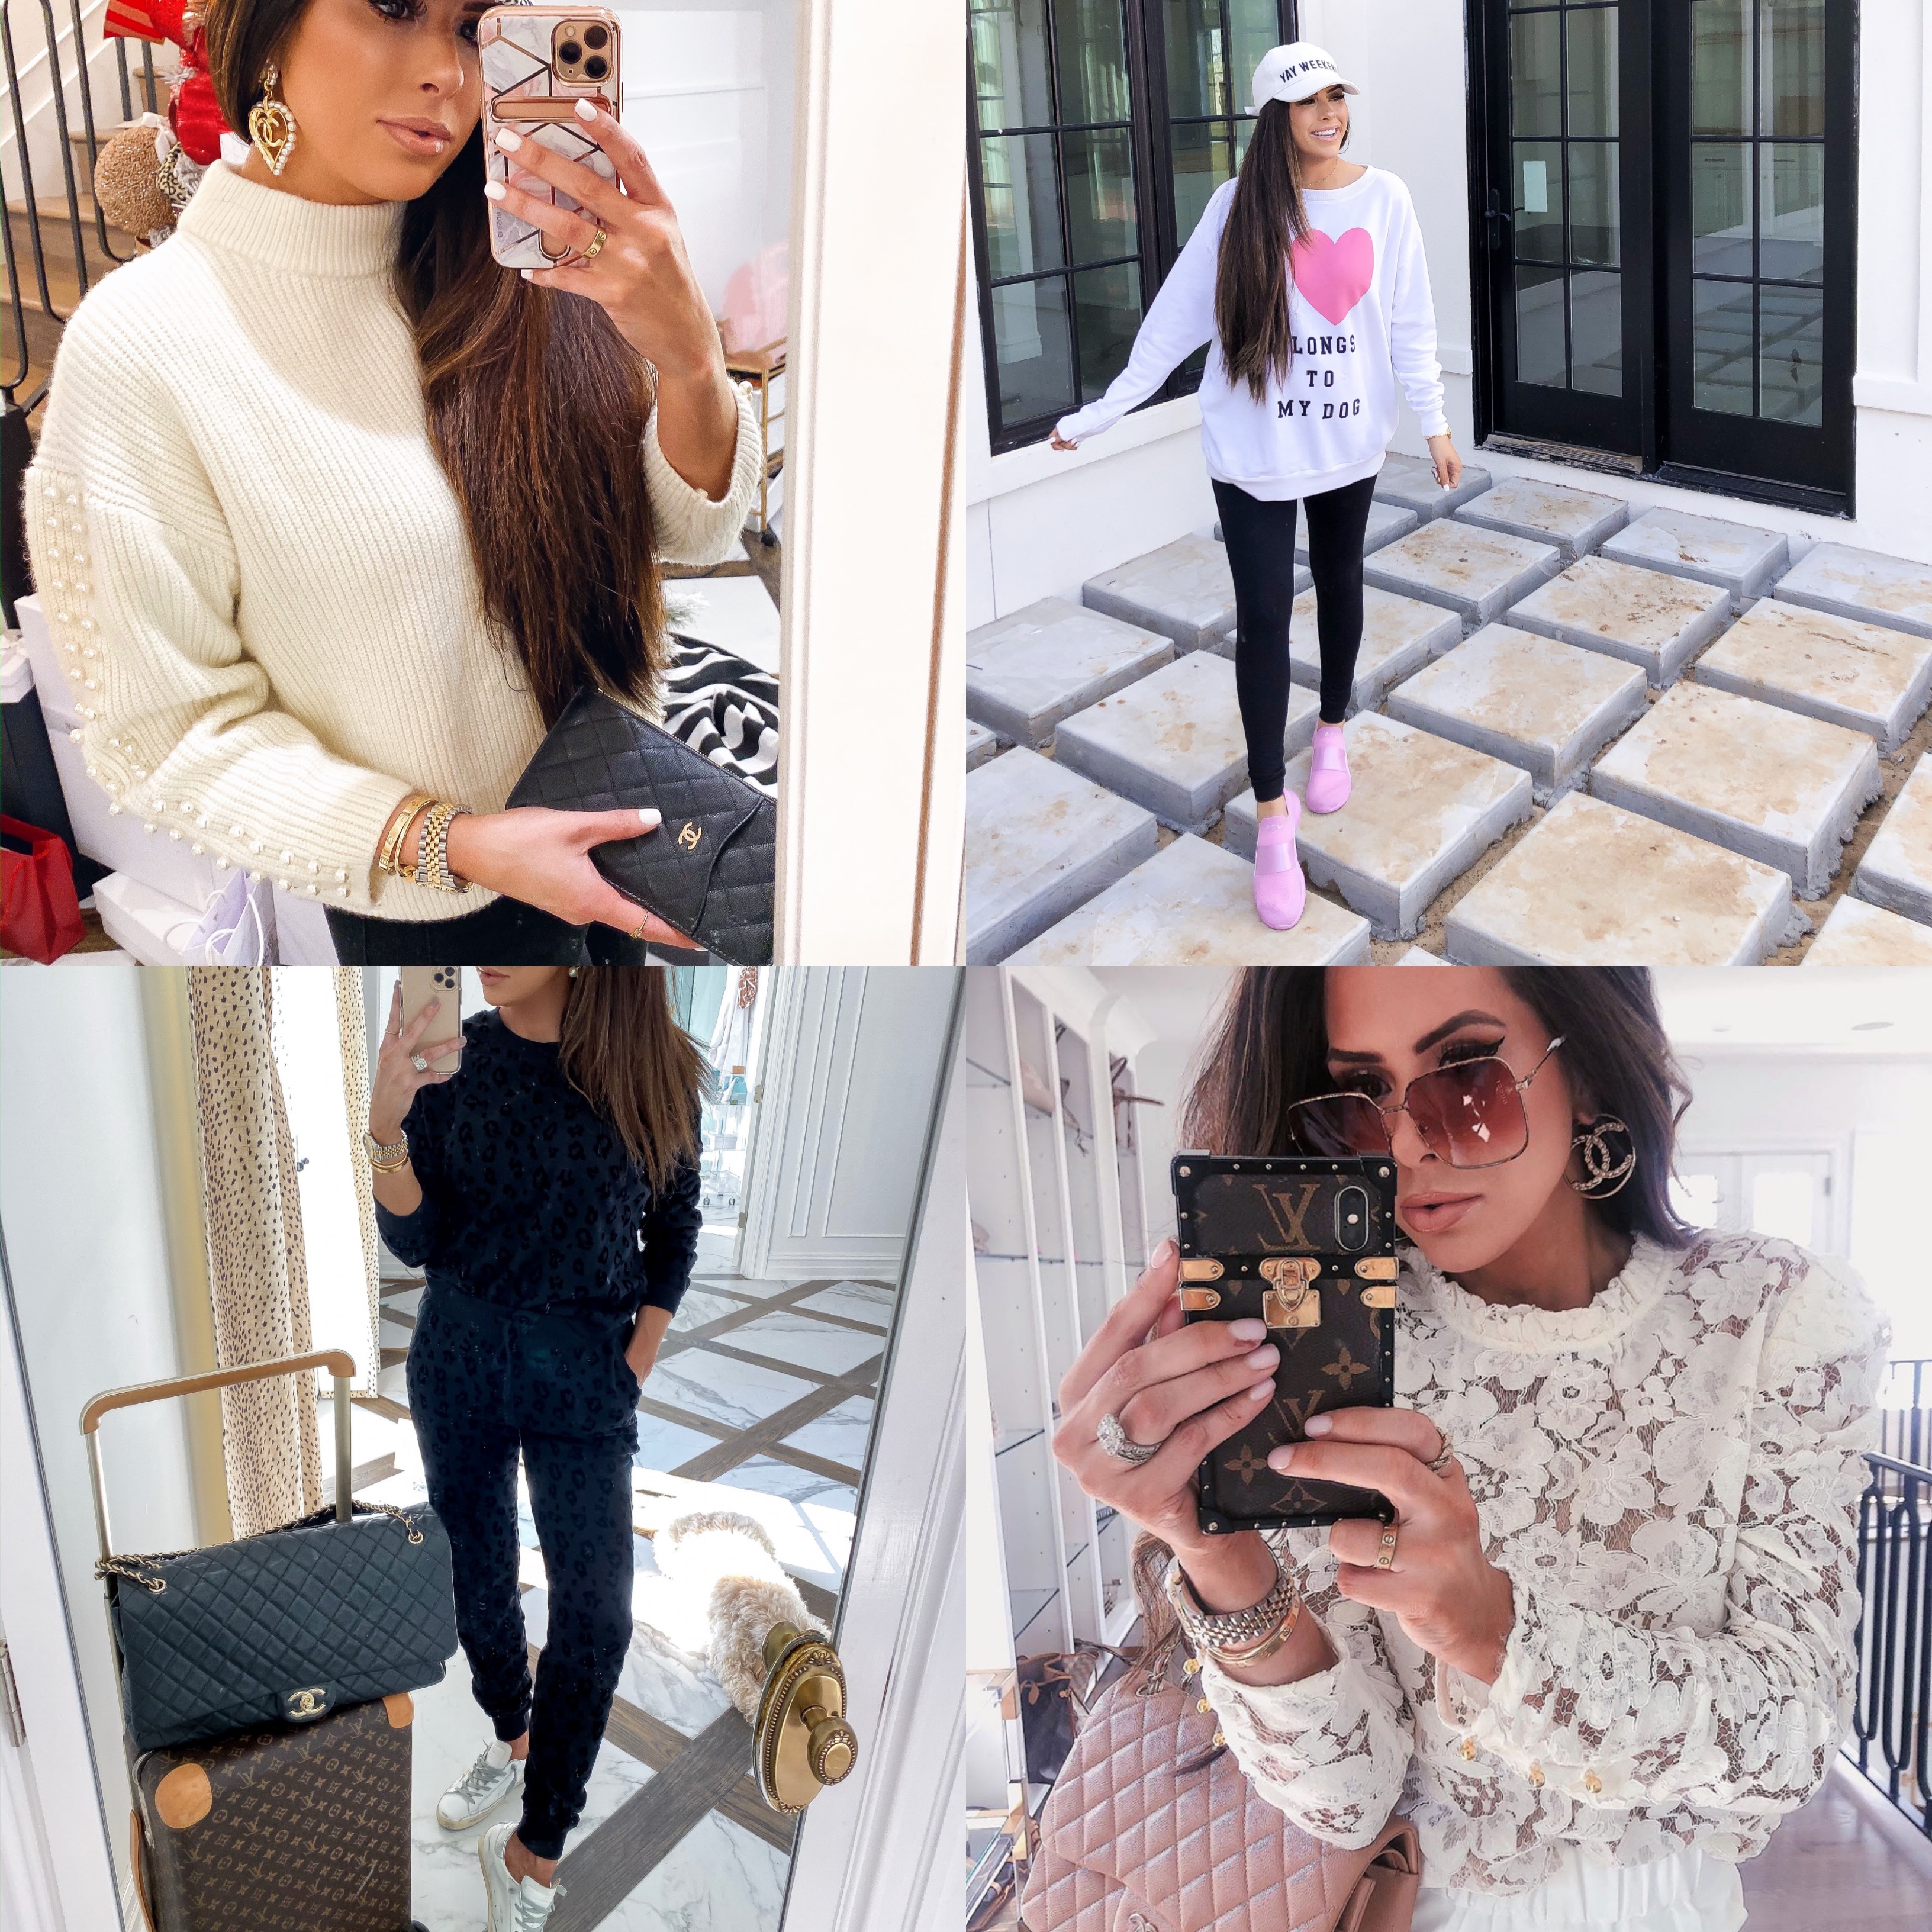 best black friday sales 2019, shopbop black friday sales, emily gemma | Mega Black Friday Sales and Deals Guide!! by popular Oklahoma life and style blog, The Sweetest Thing: collage image of a woman wearing various Black Friday sale items. 